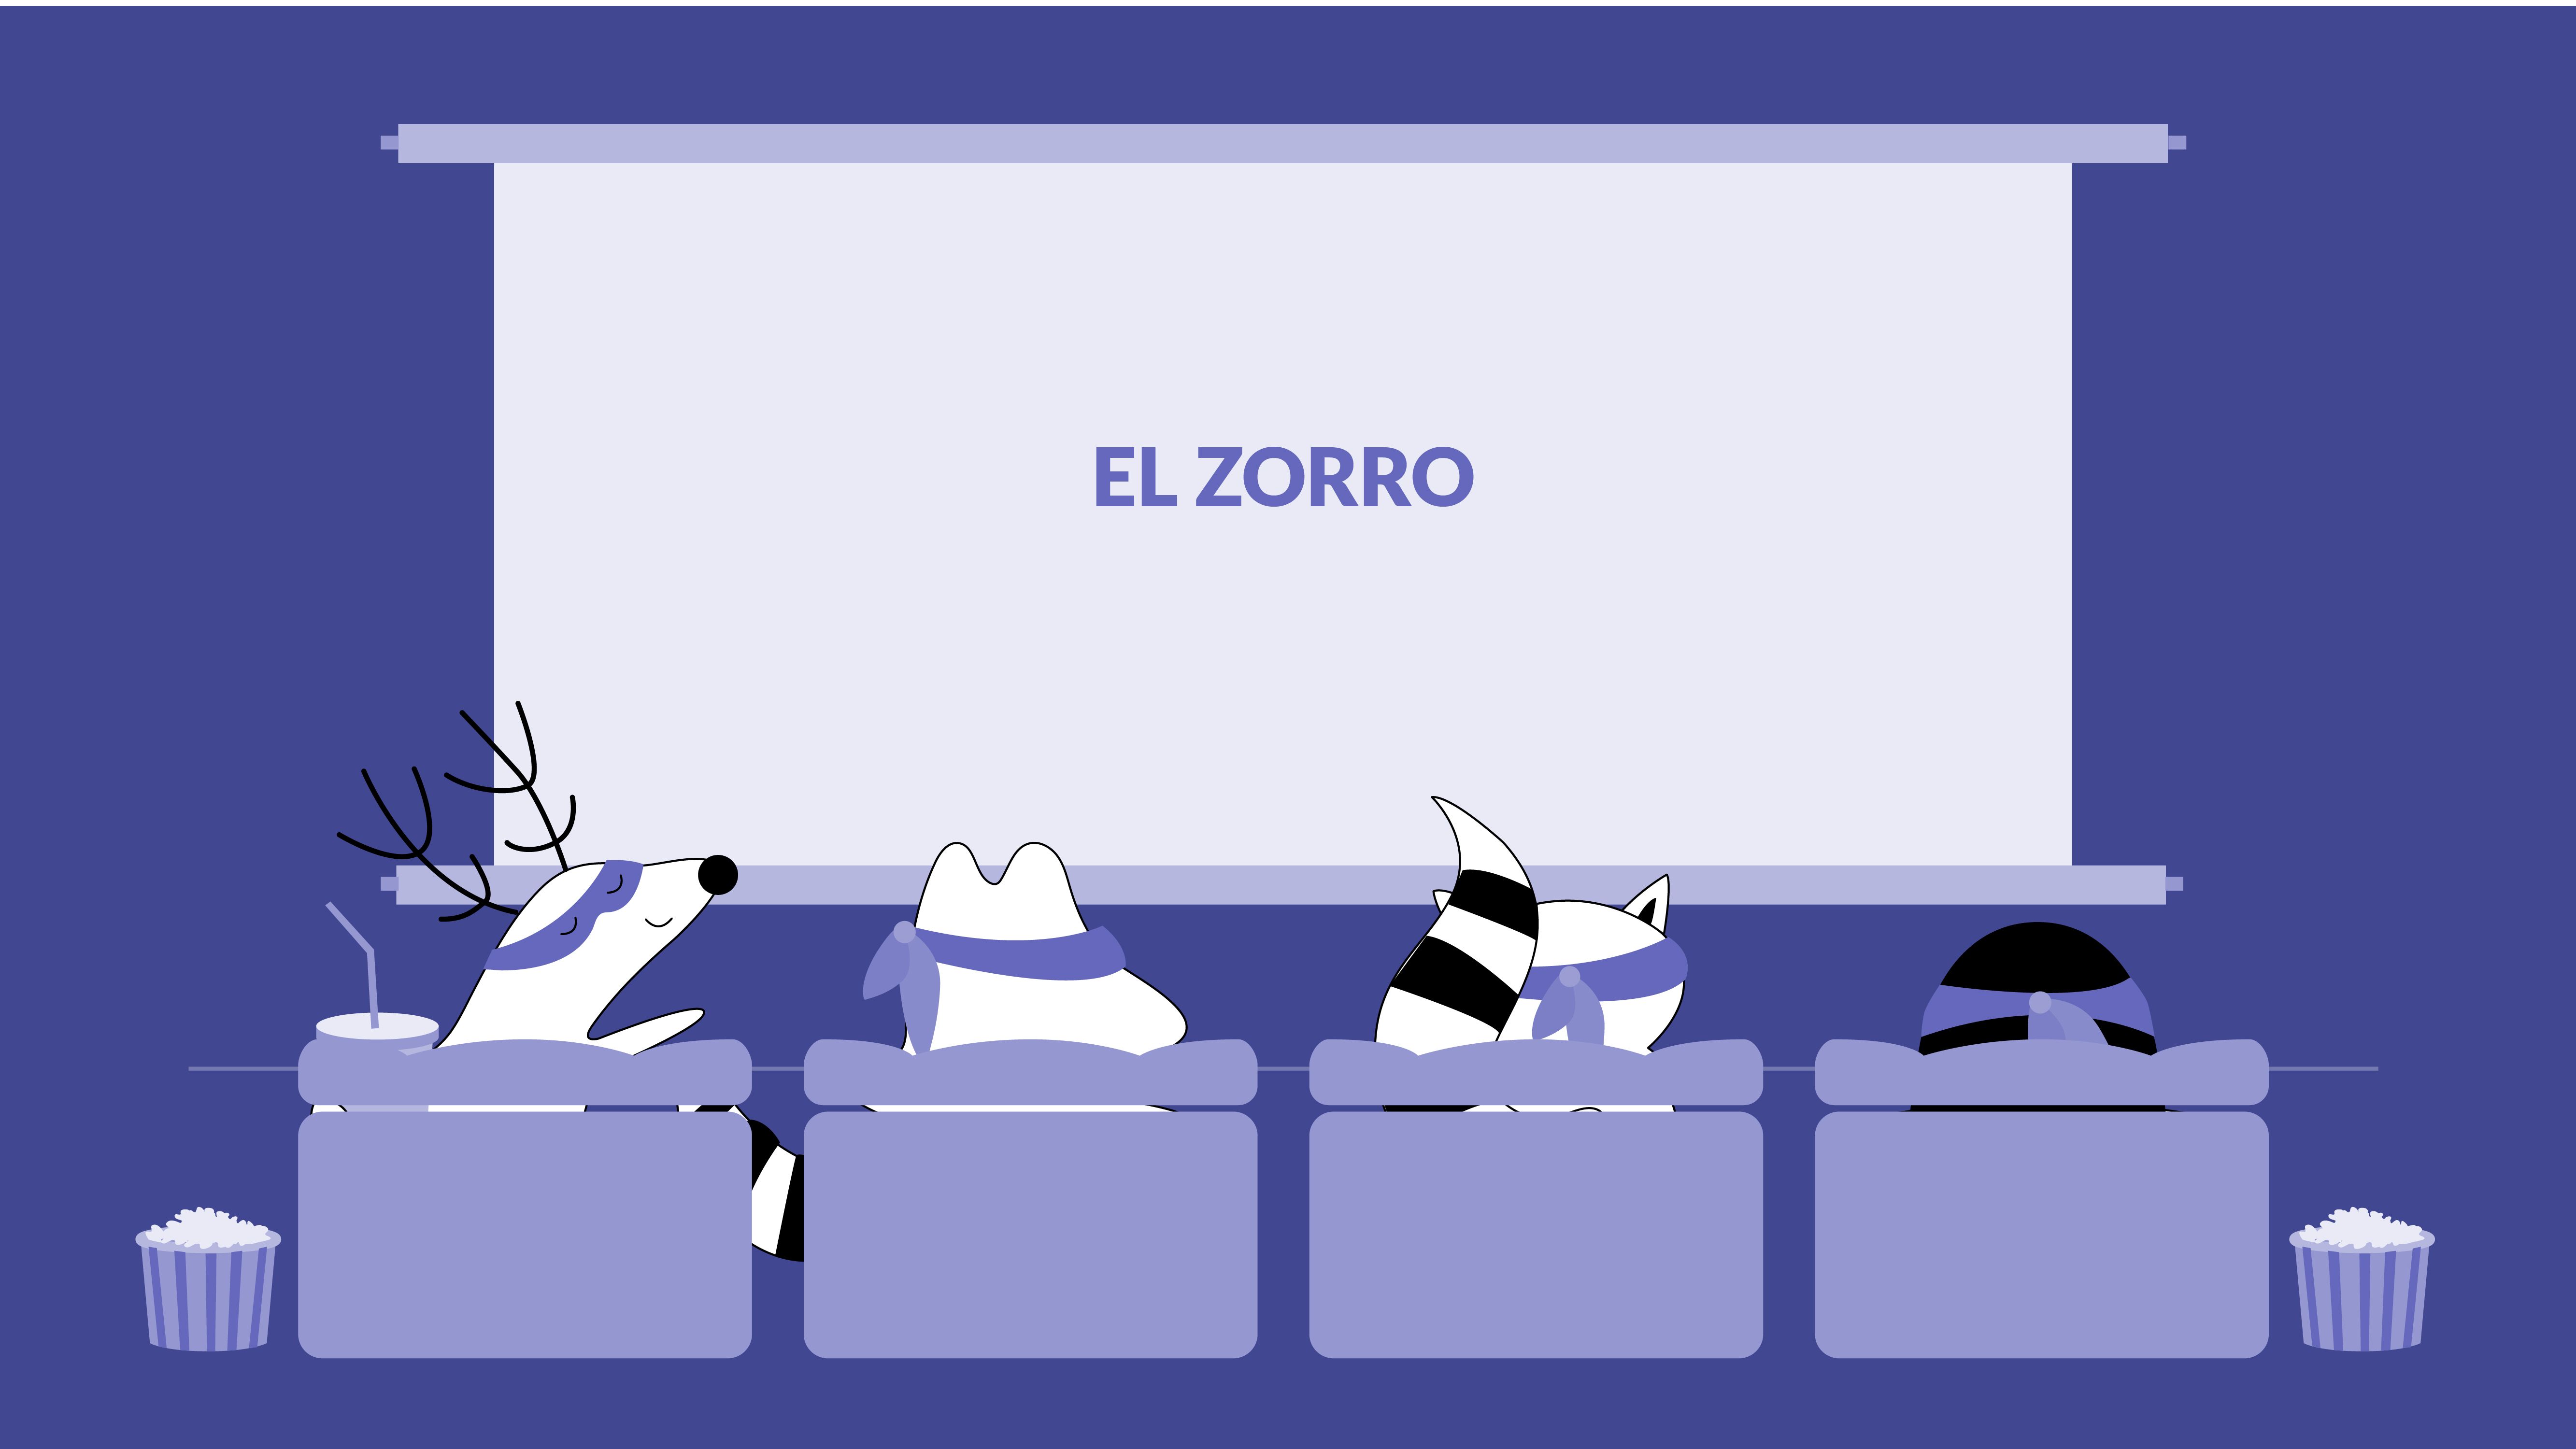 Soren and Pocky are at the cinema, watching a movie called “El Zorro.”